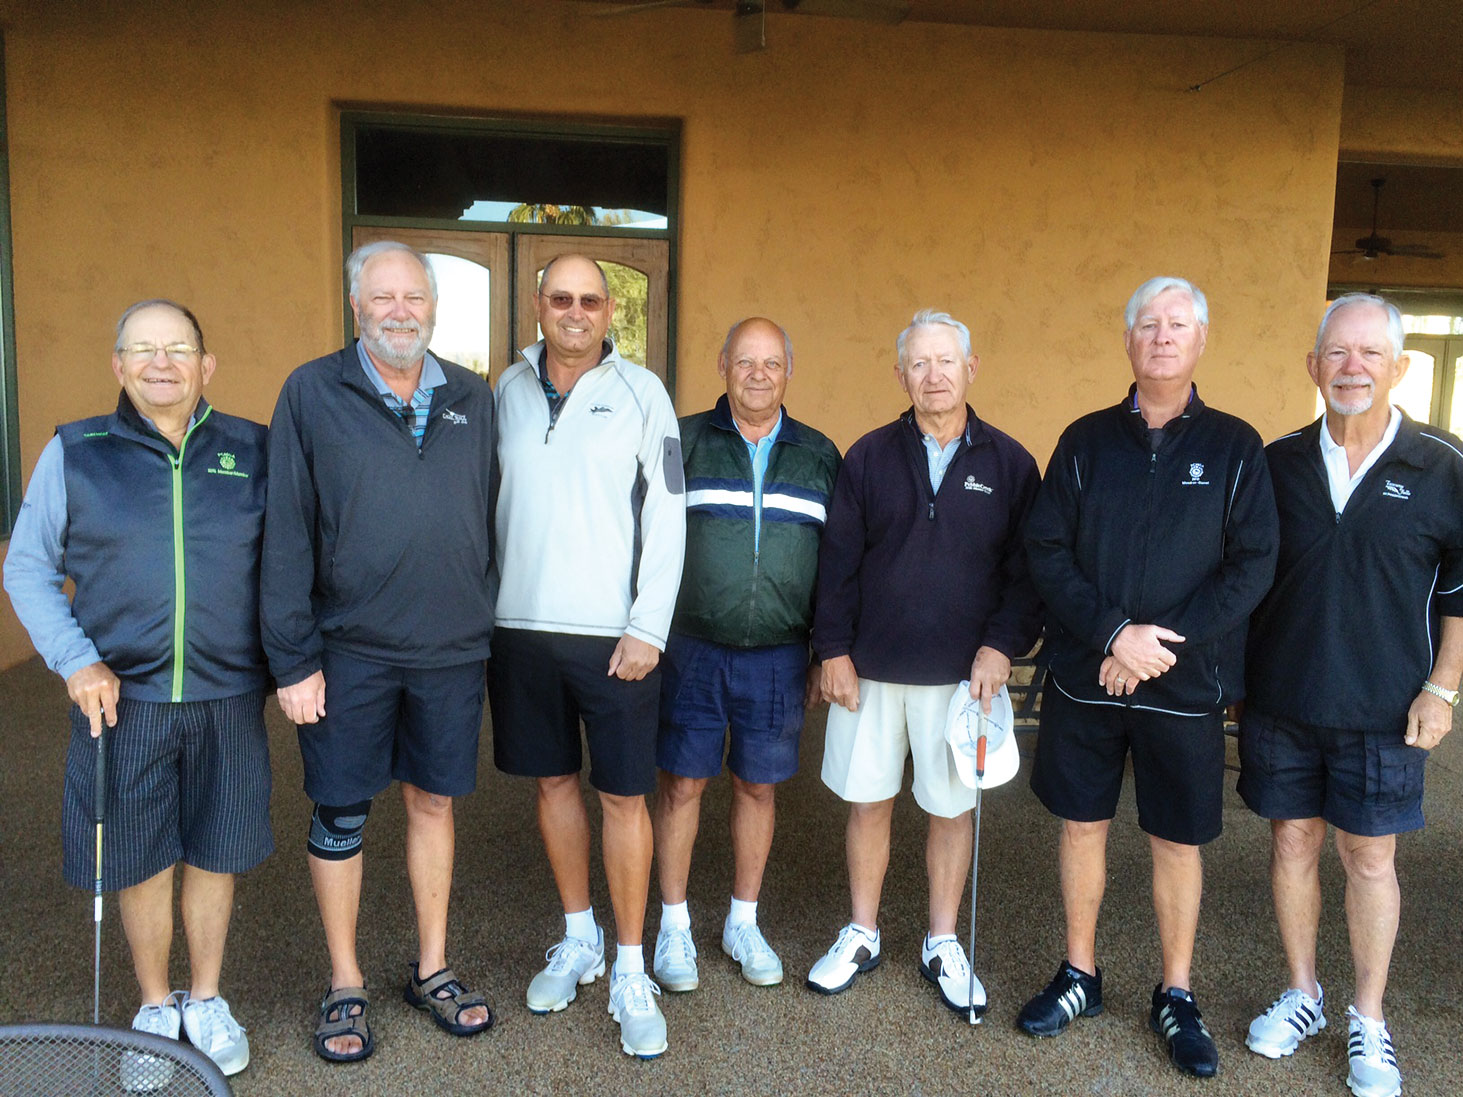 Member-Member winners flights five through eight, left to right: Robert Stofac, Rodney Oonk, Jim Sheard, Rich Hauser, Doug Goodin, Jerry Monk and Charlie Kice; not pictured, Robert White